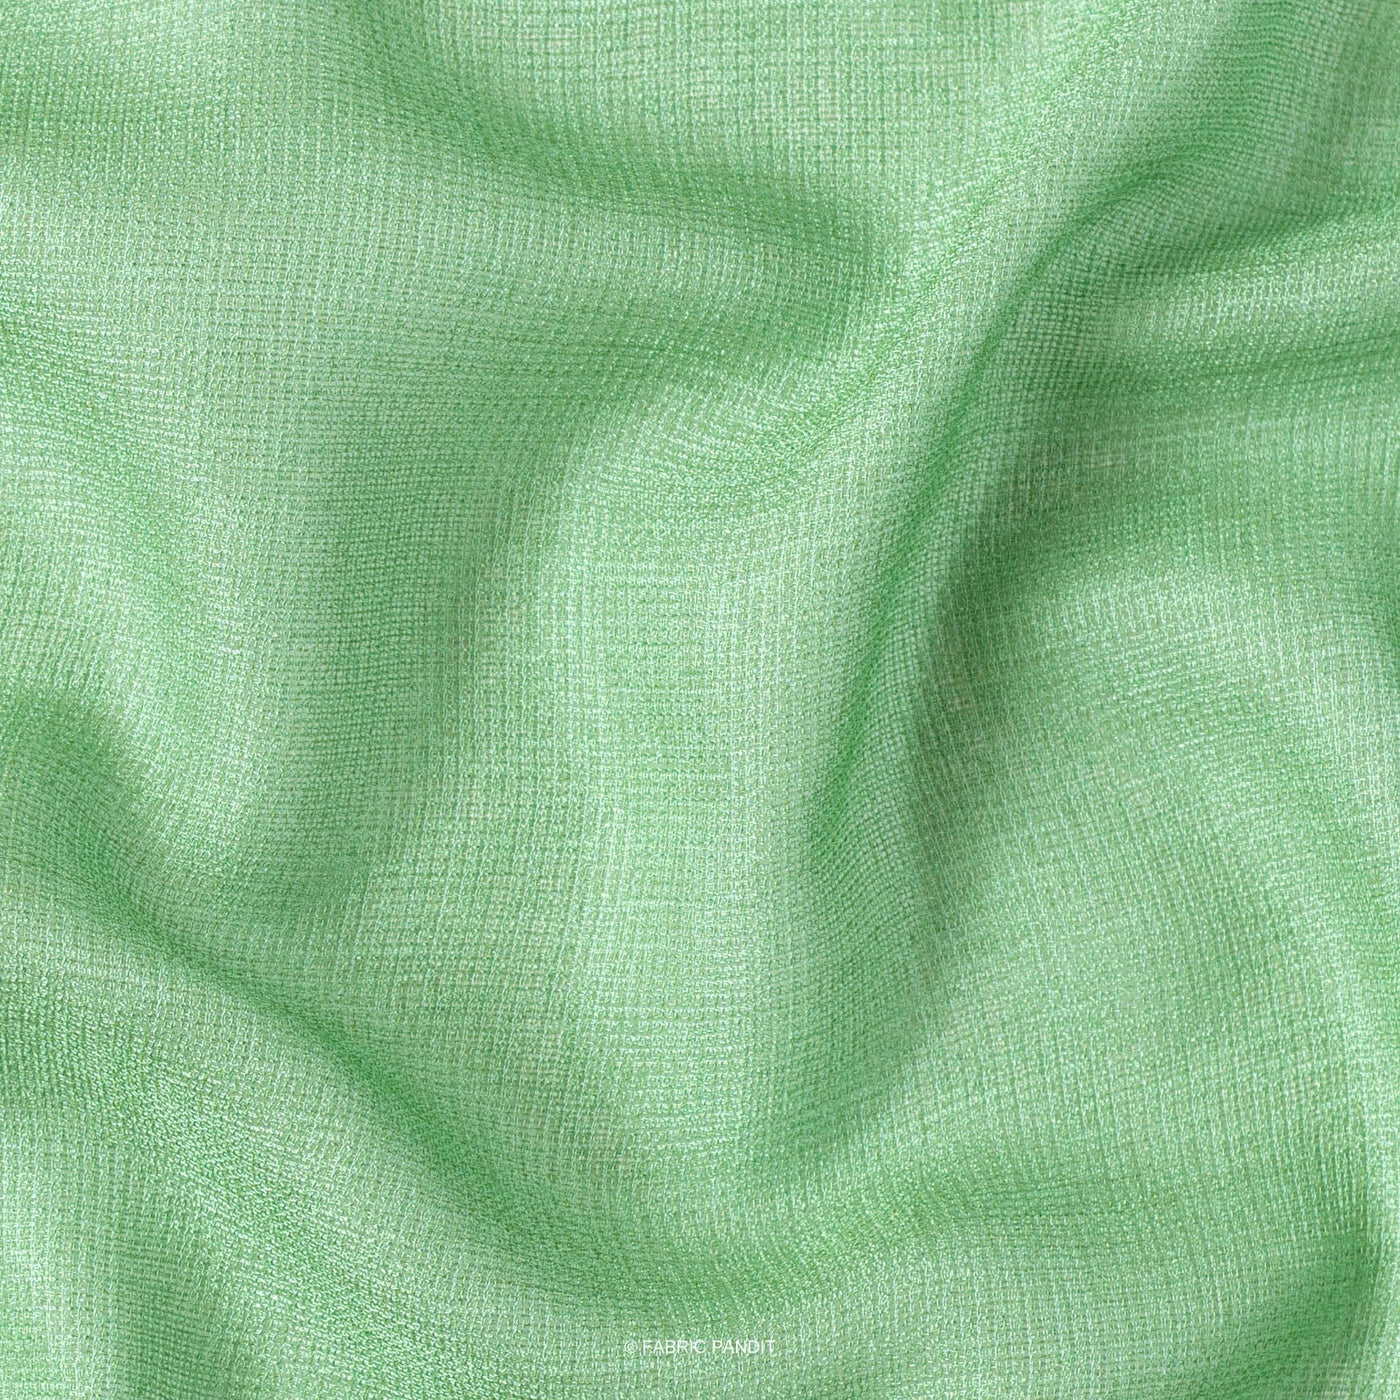 Fabric Pandit Fabric Light Green Color Poly Jute Fabric (Width 44 Inches)